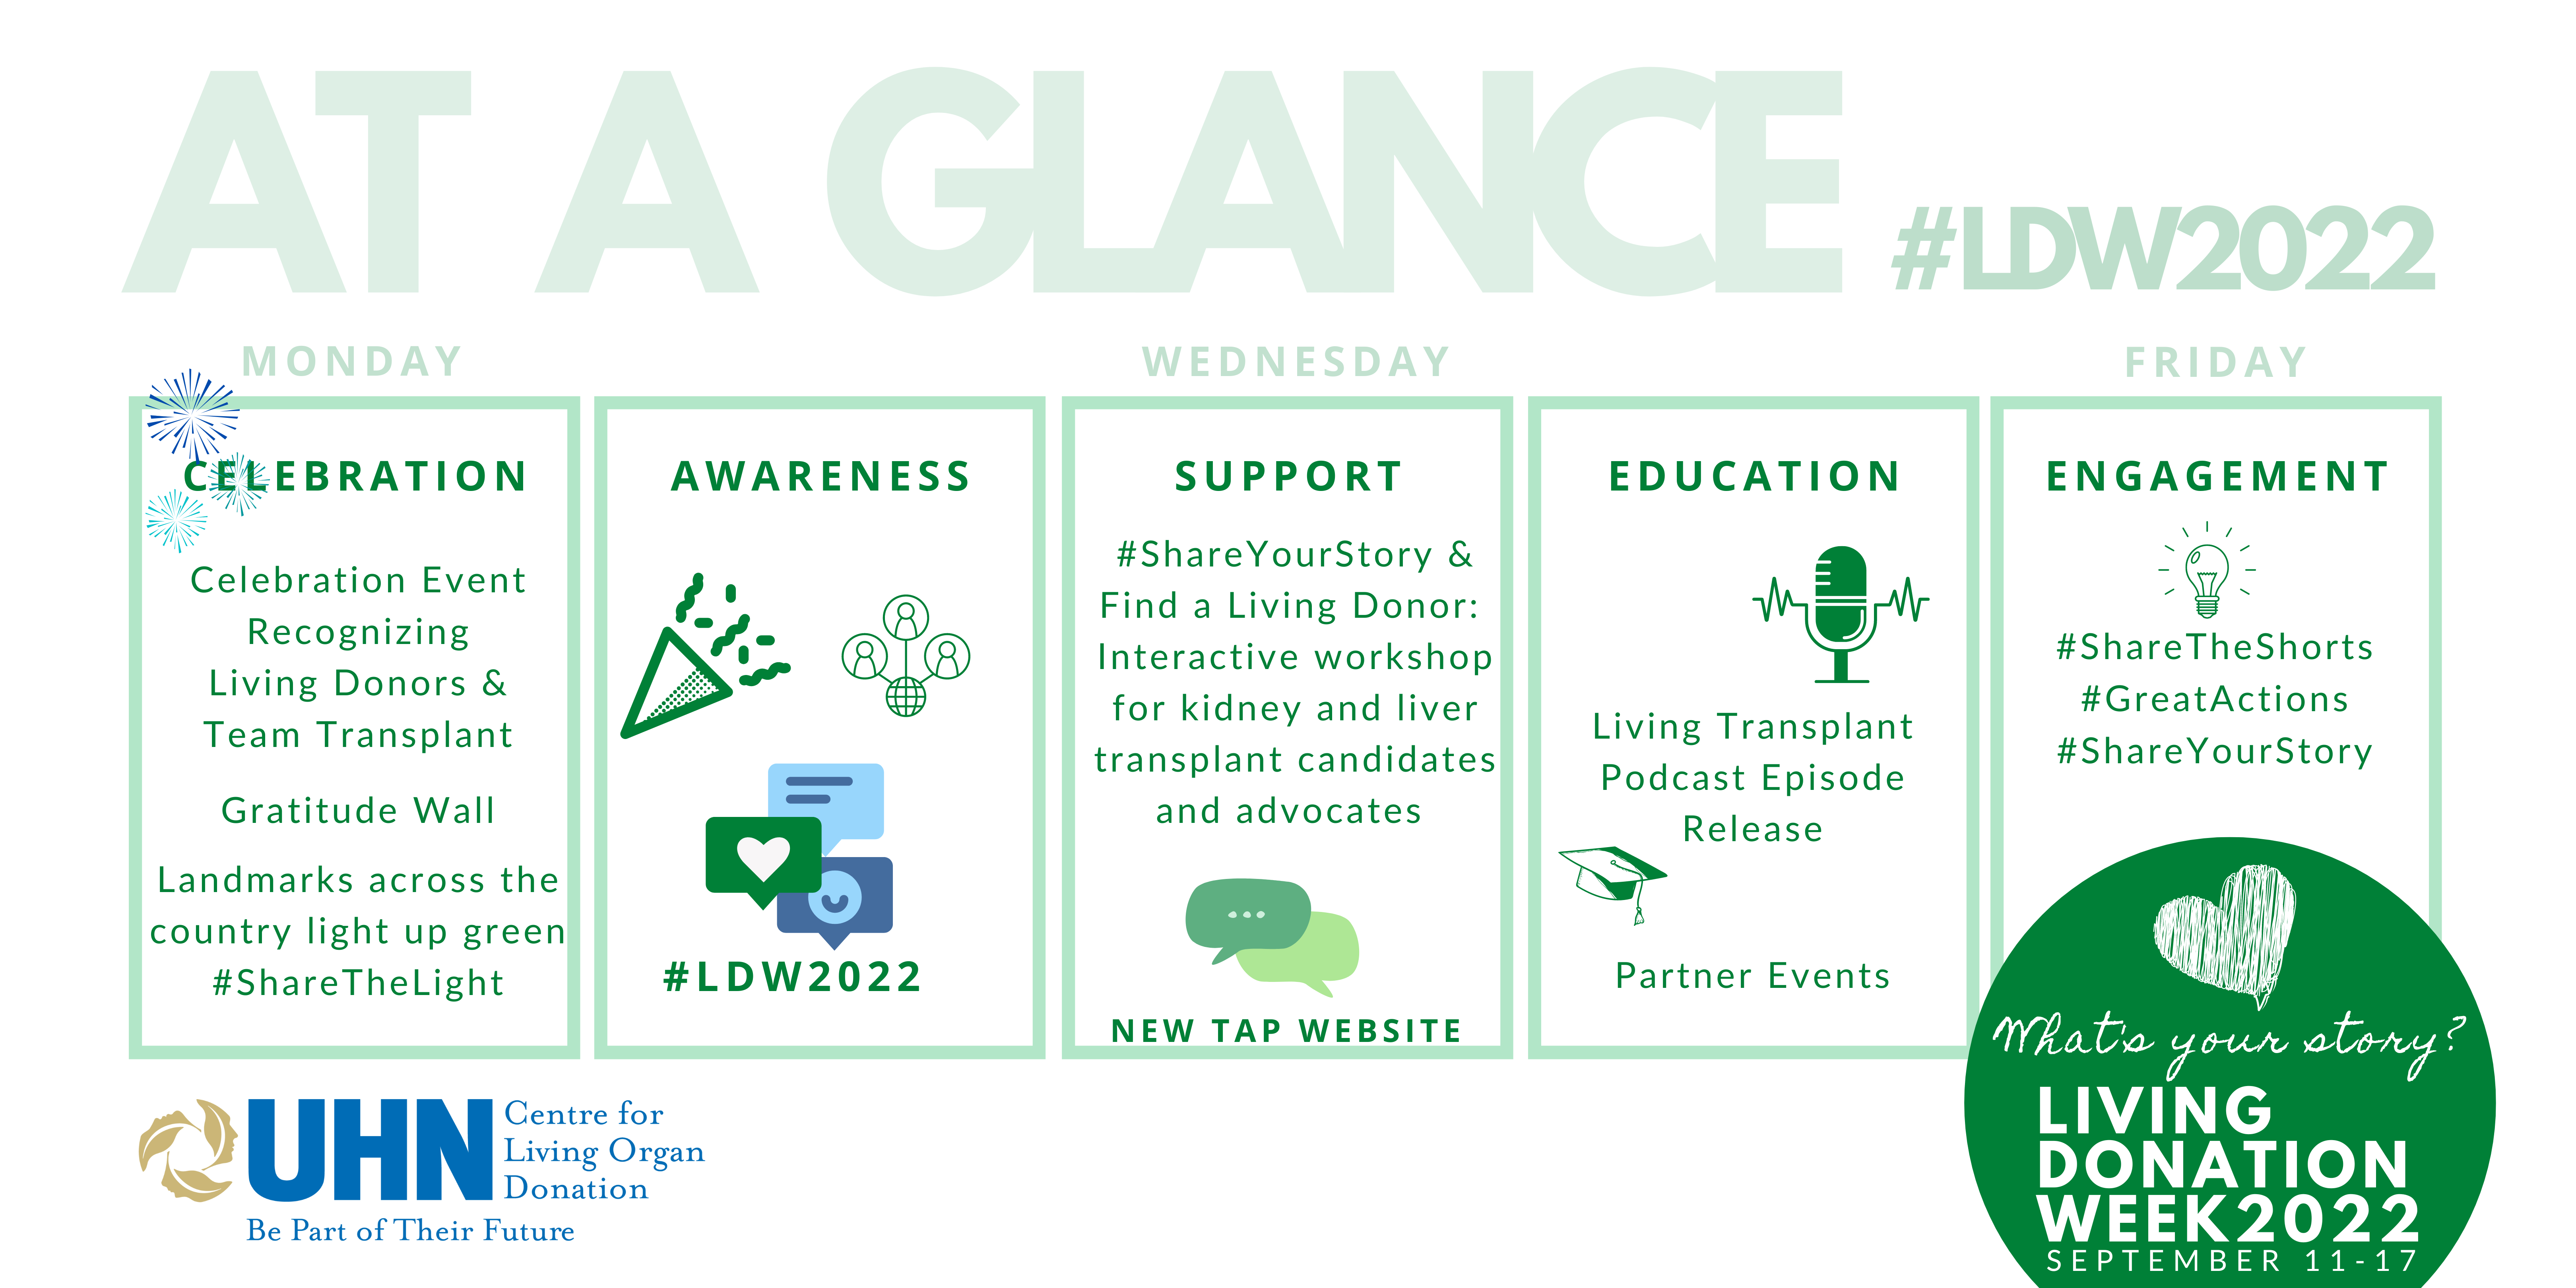 At a Glance: Celebration. Awareness. Support, Education. Research